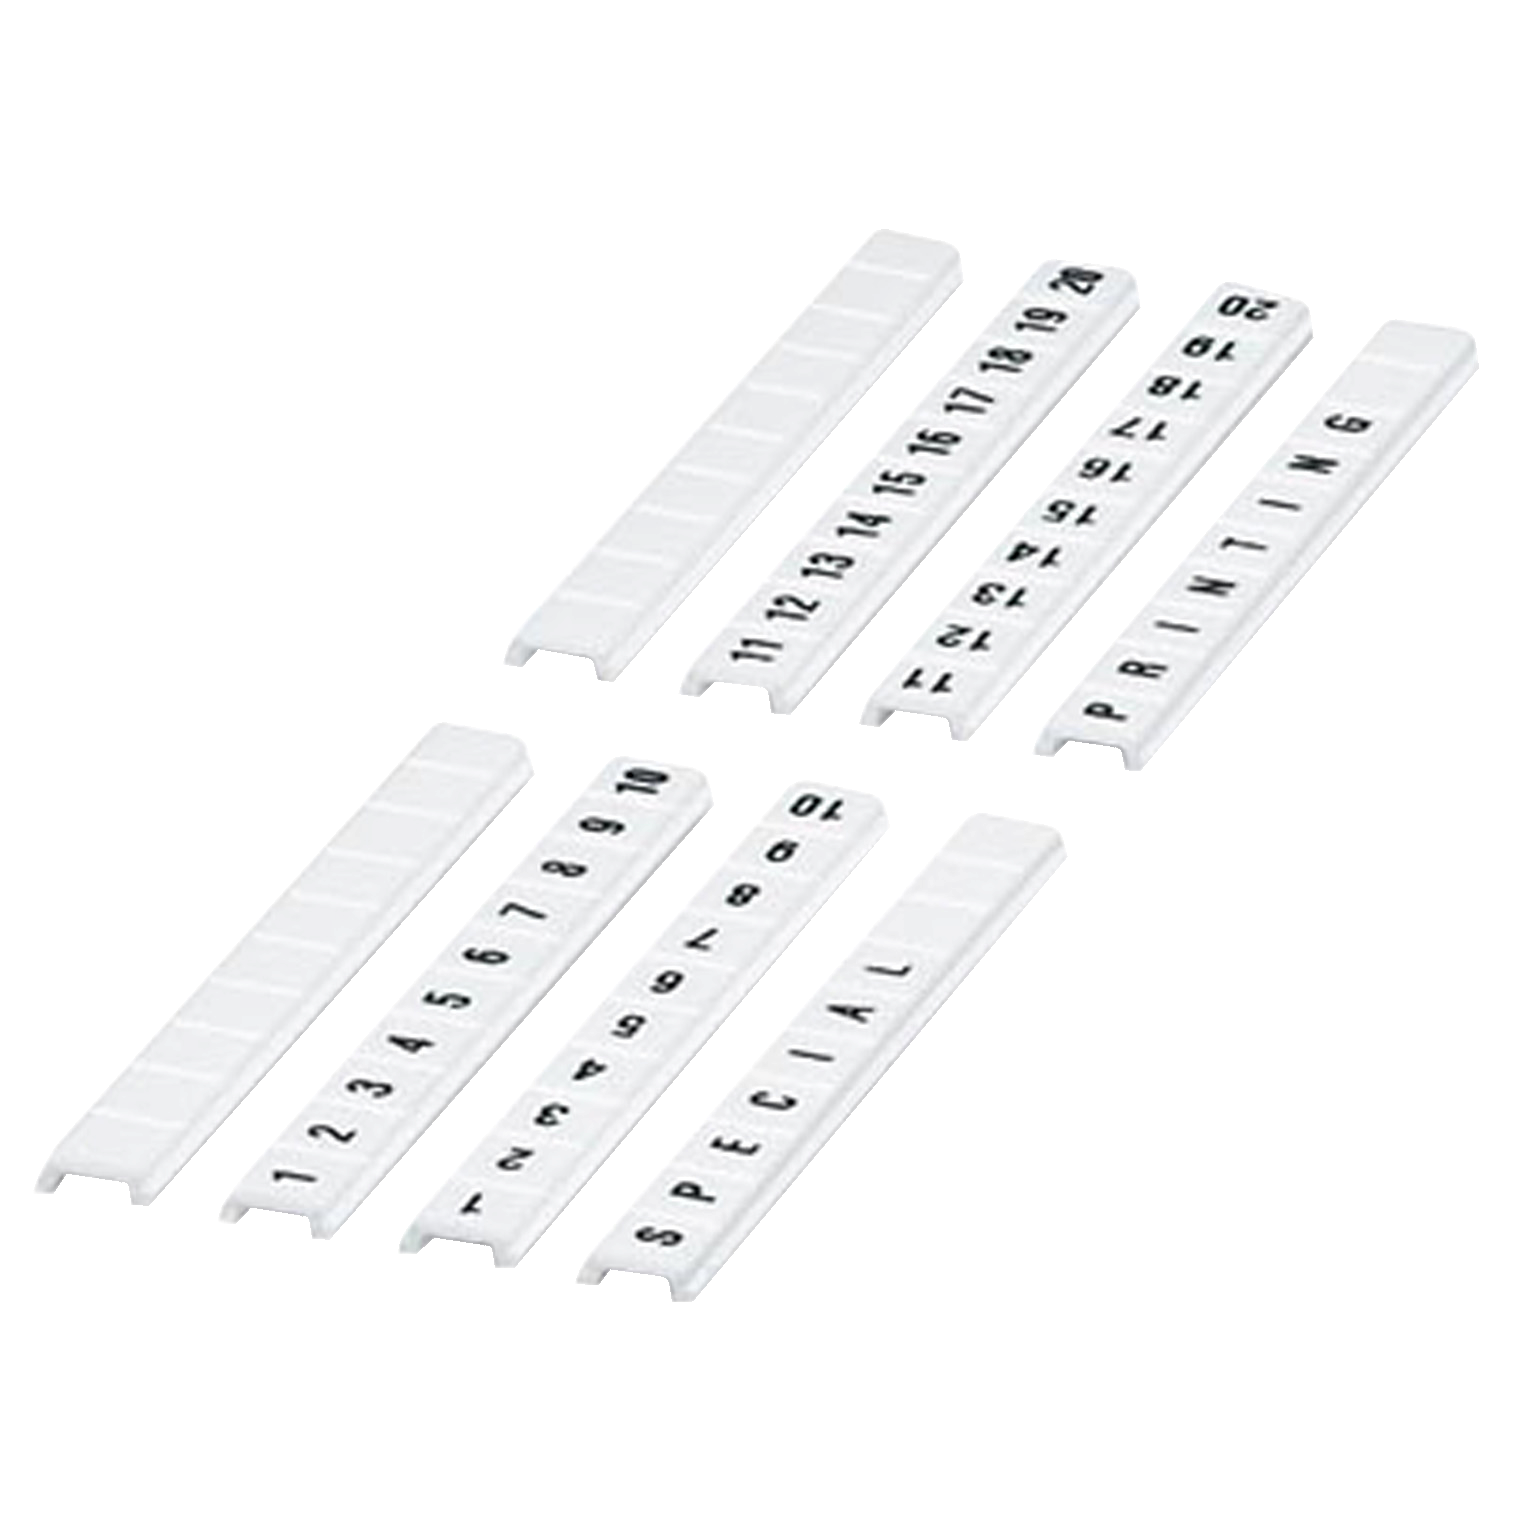 Marking strip, Linergy TR, clip in type, flat, 5mm, printed characters 41 to 50, printed horizontal, white, Set of 10